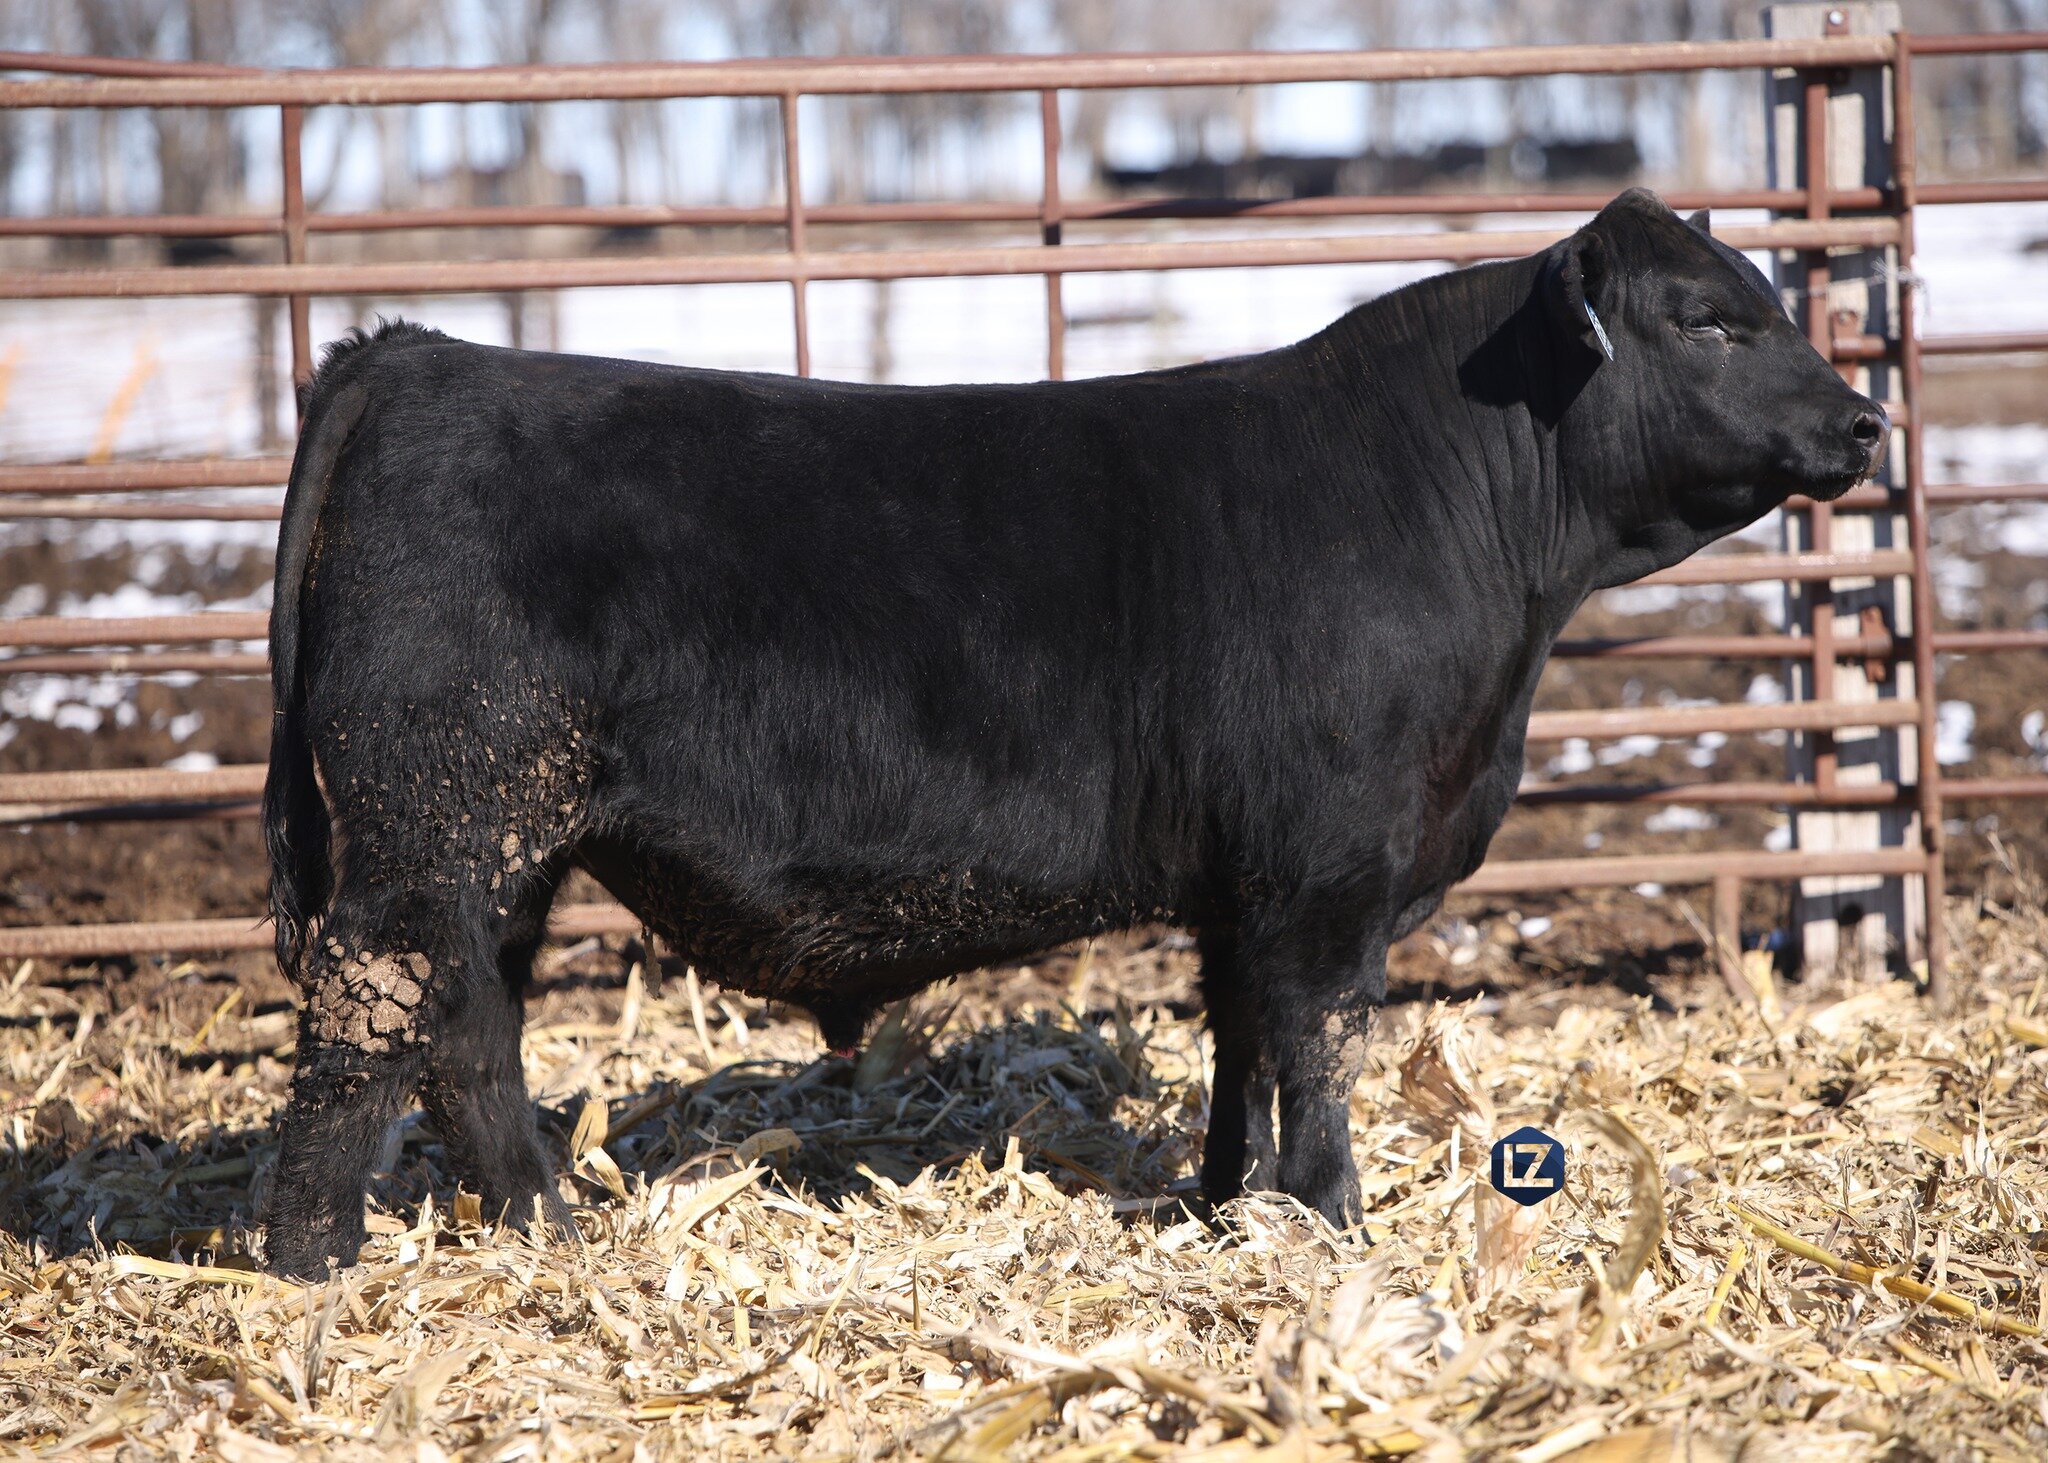 Join us tomorrow, March 16th for the LZ Livestock Bull + Female Sale Preview/Bidding Day! This years sale will be hosted online through The Livestock Link with bidding open from 7AM - 7PM! 

View Catalog + Videos + Bidding at: http://www.thelivestock